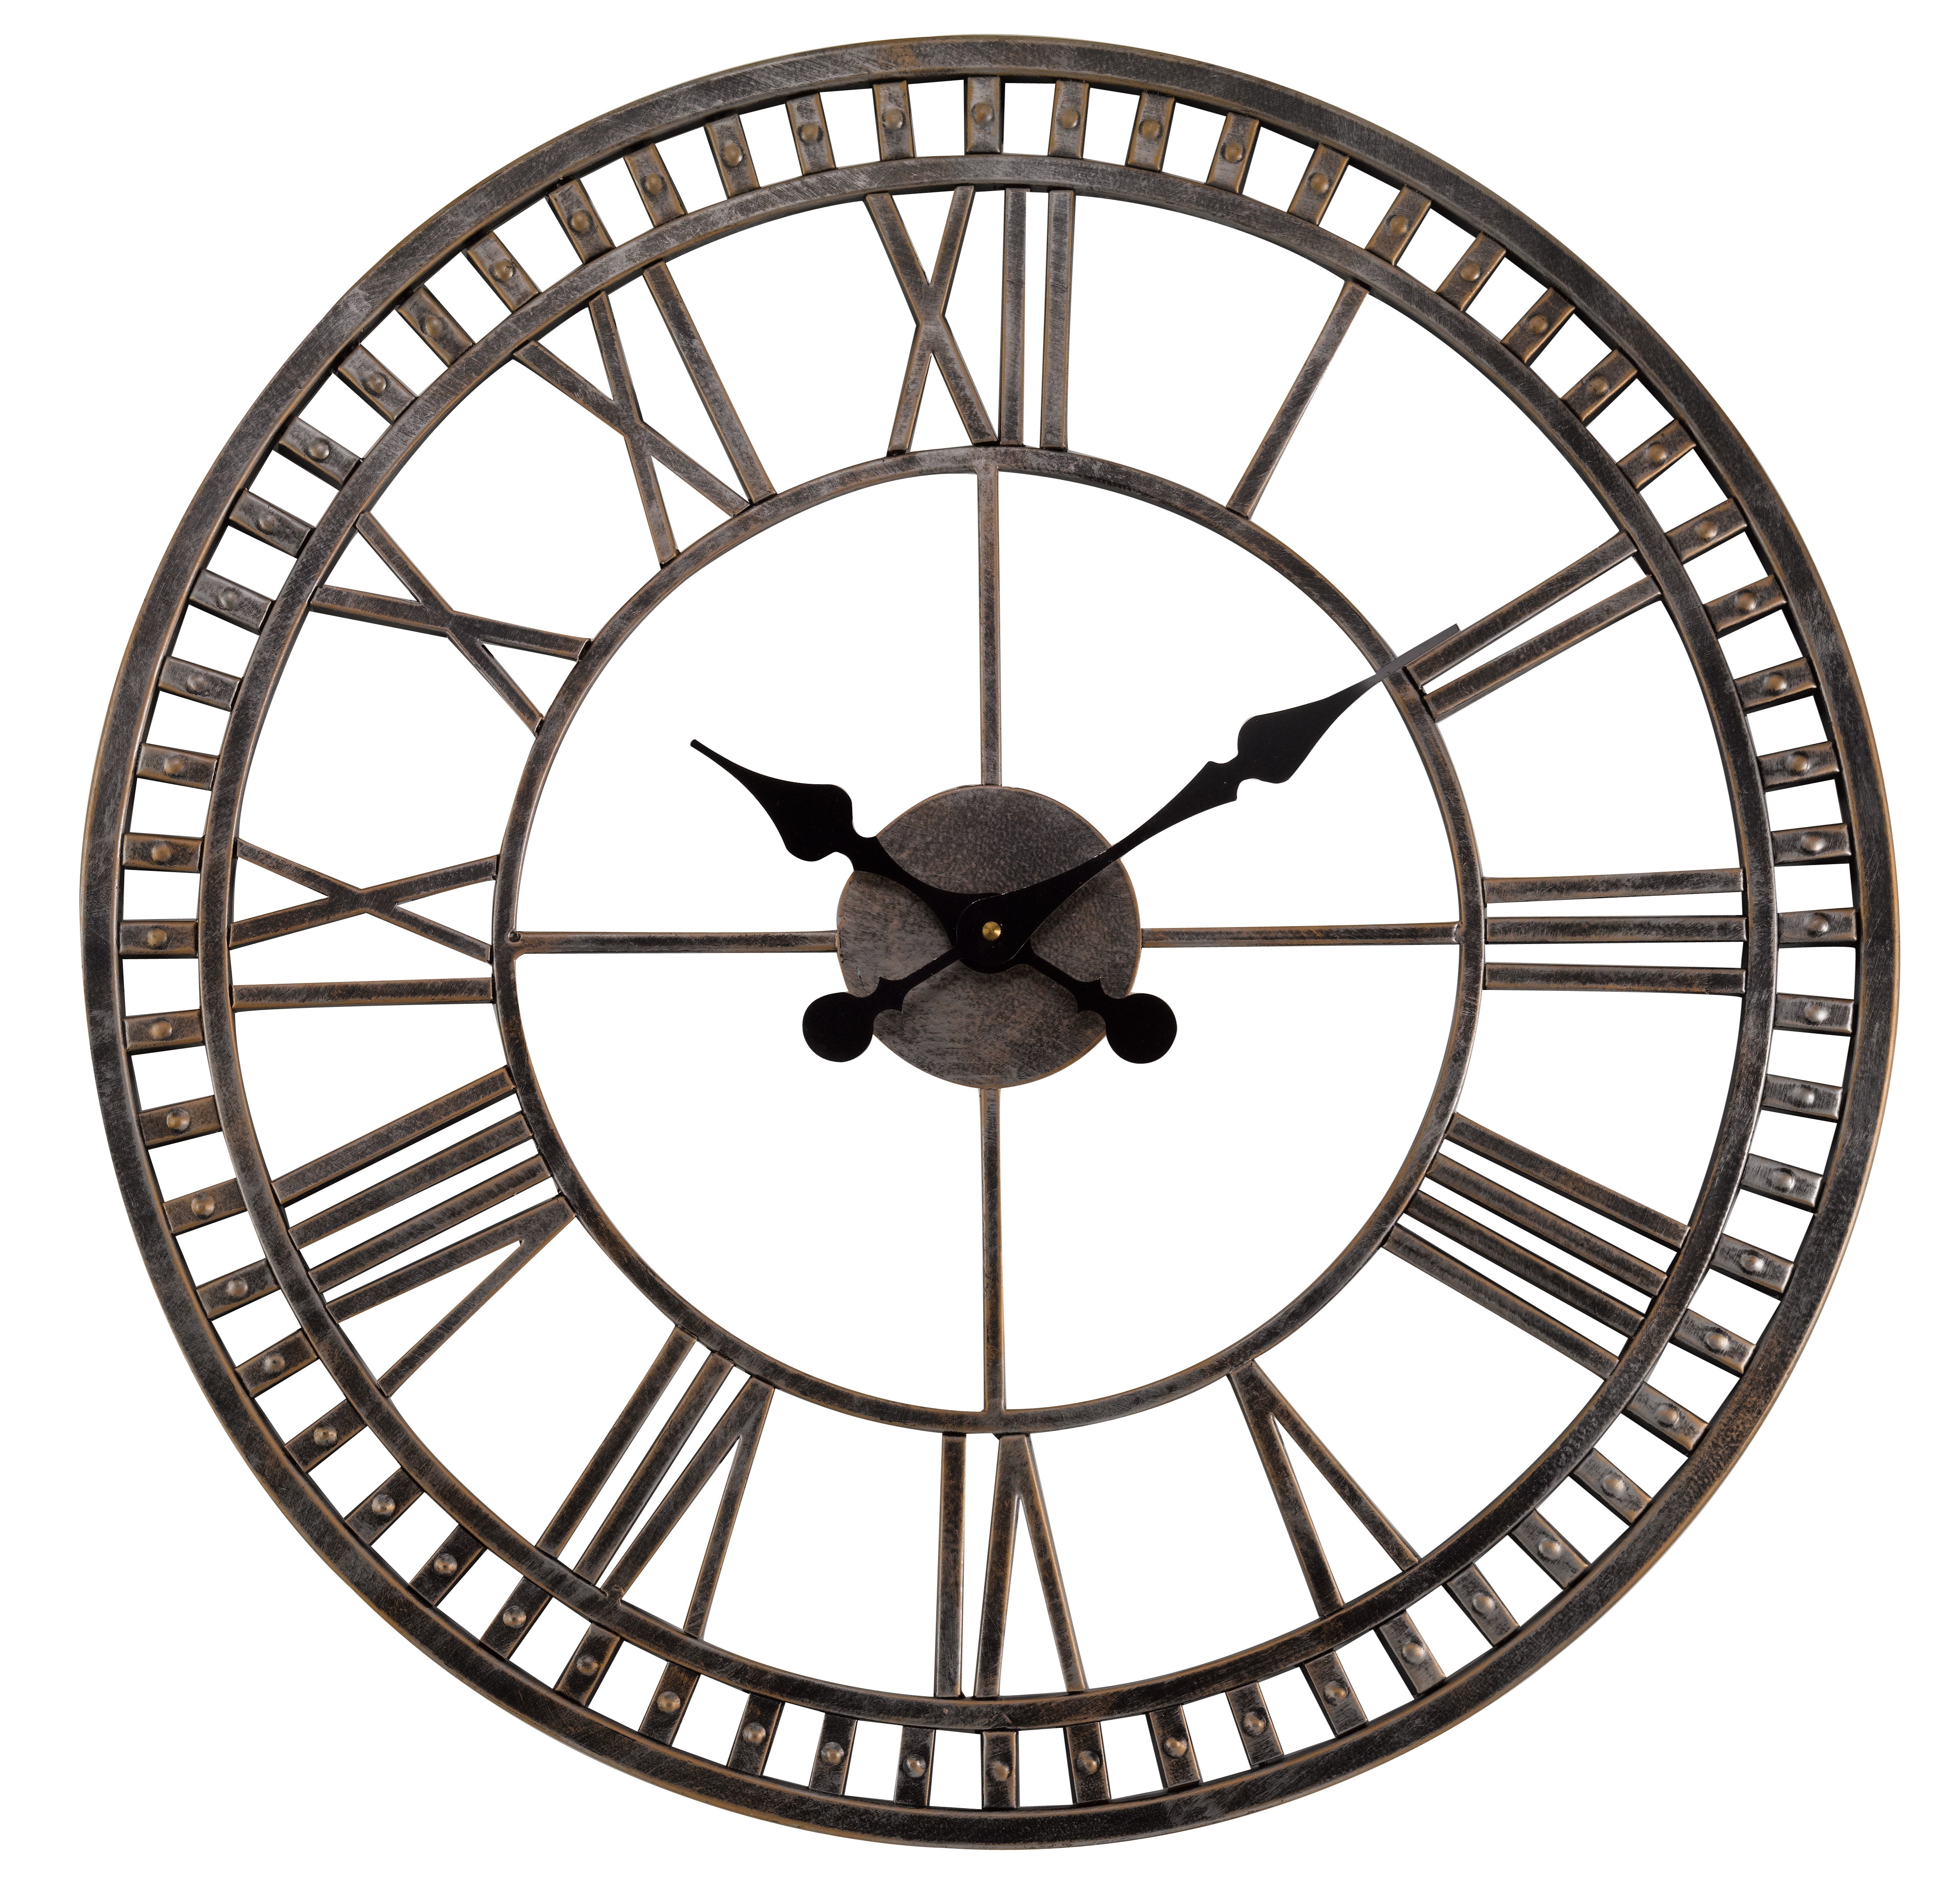 Buxton 23in Outdoor Skeleton Wall Clock